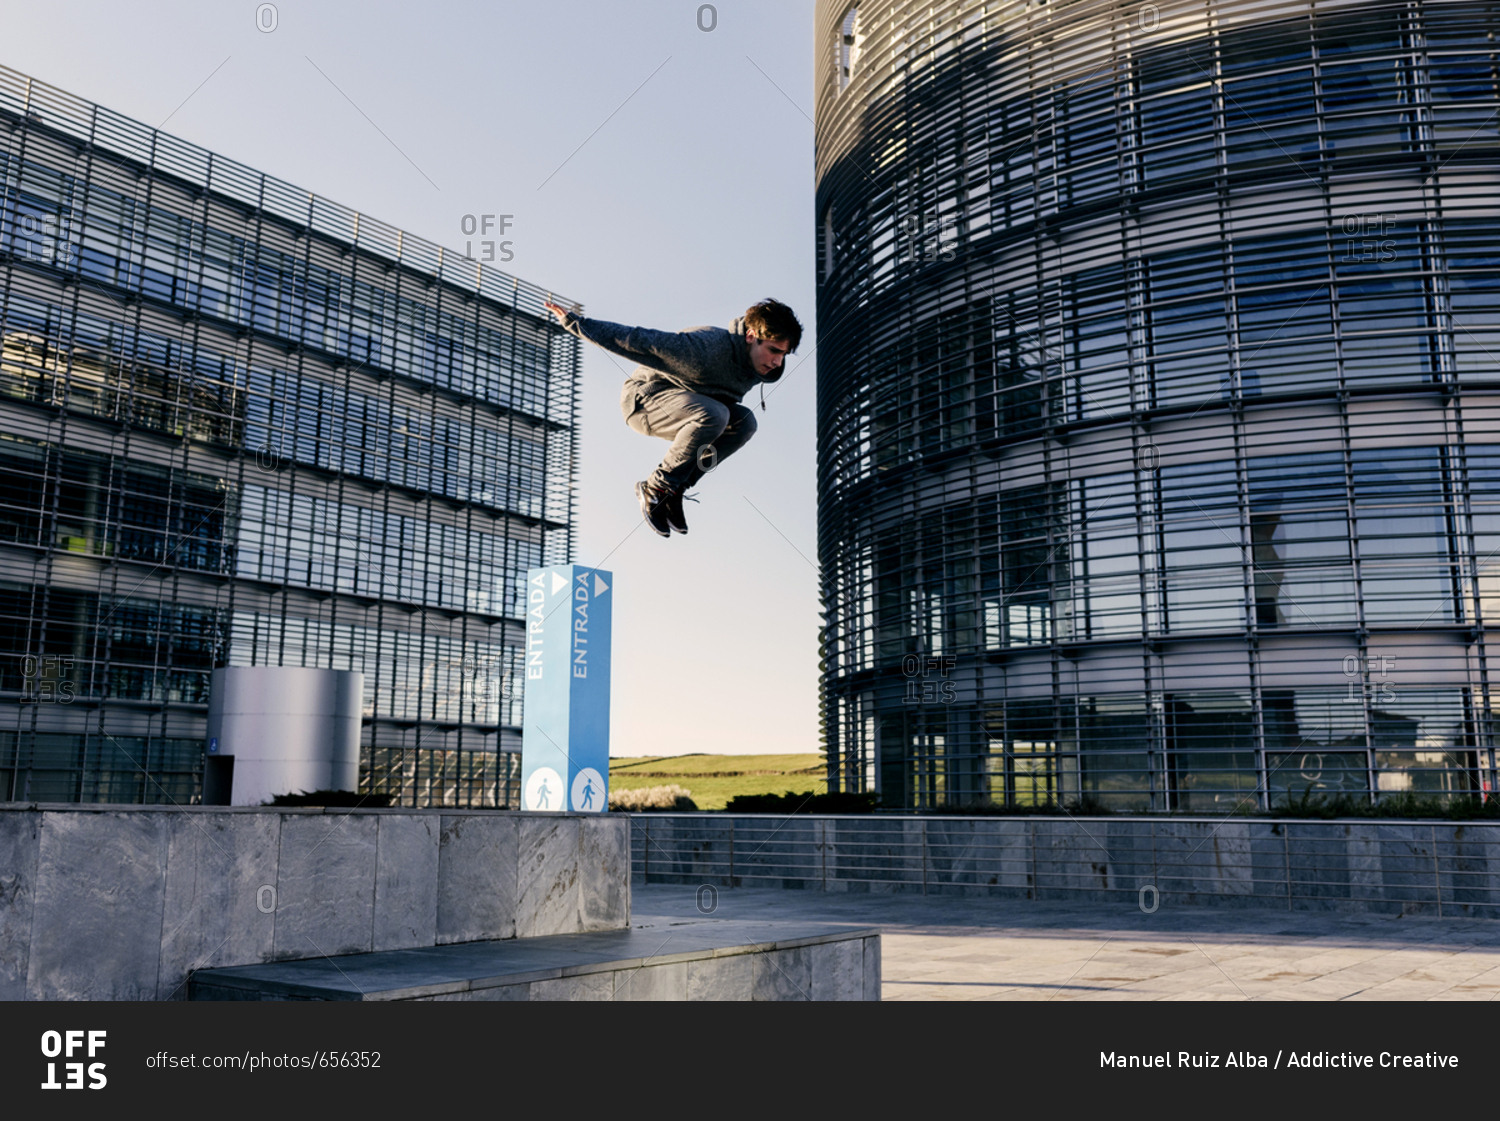 Man performing parkour in city